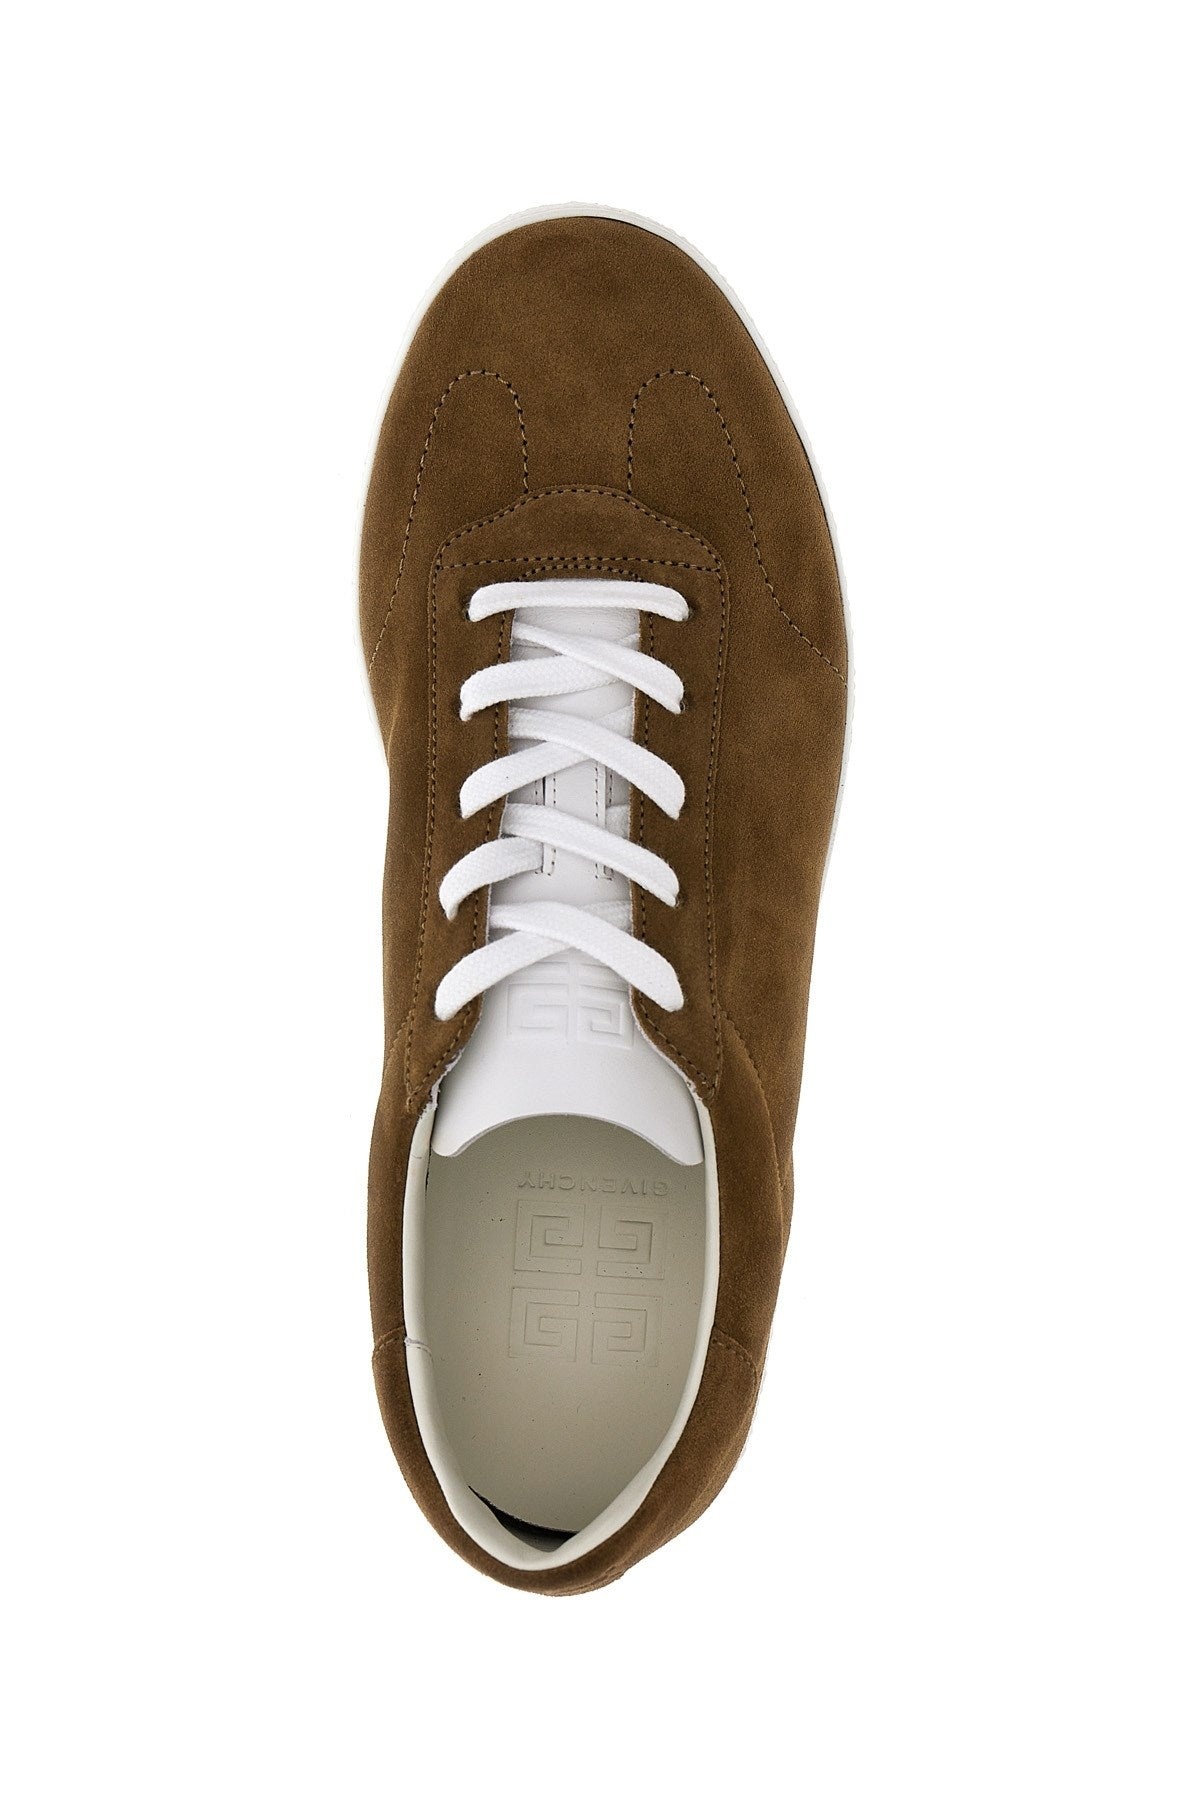 Givenchy Men 'Town' Sneakers - 3